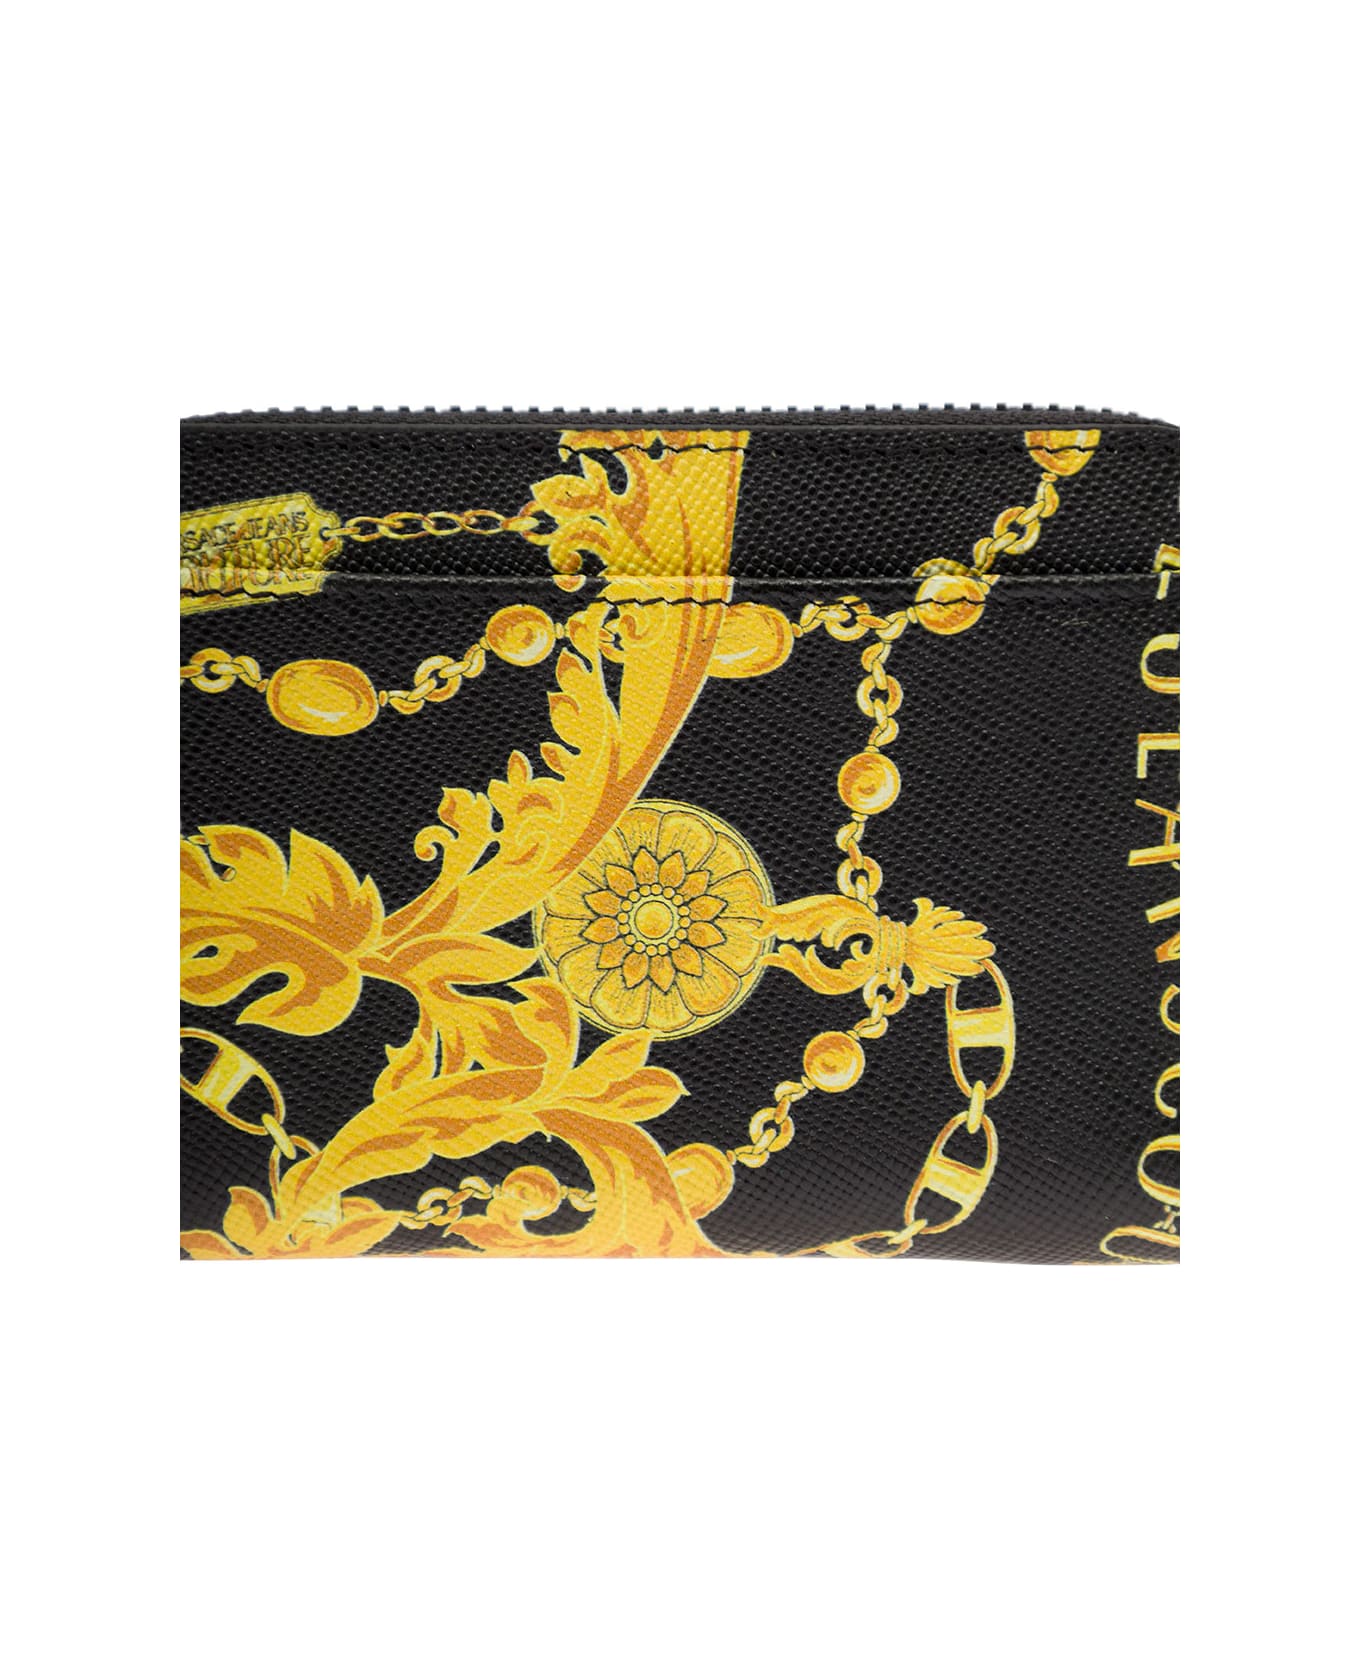 Versace Jeans Couture Black Zip-around Wallet With Barocco Print In Leather Man - Black 財布